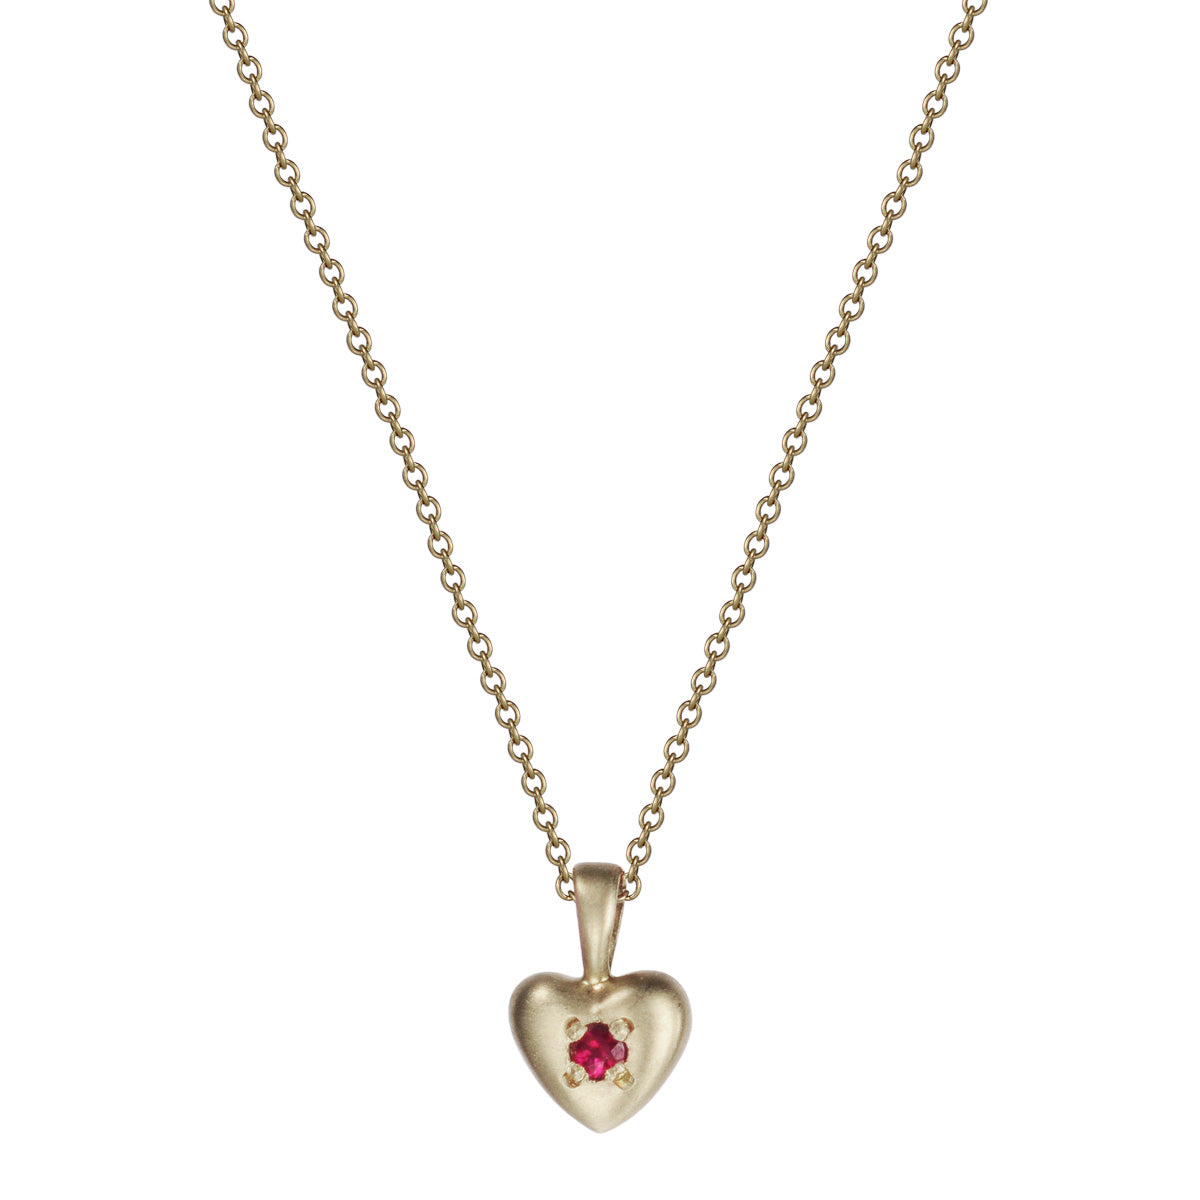 10K Gold Tiny Heart Pendant with Ruby